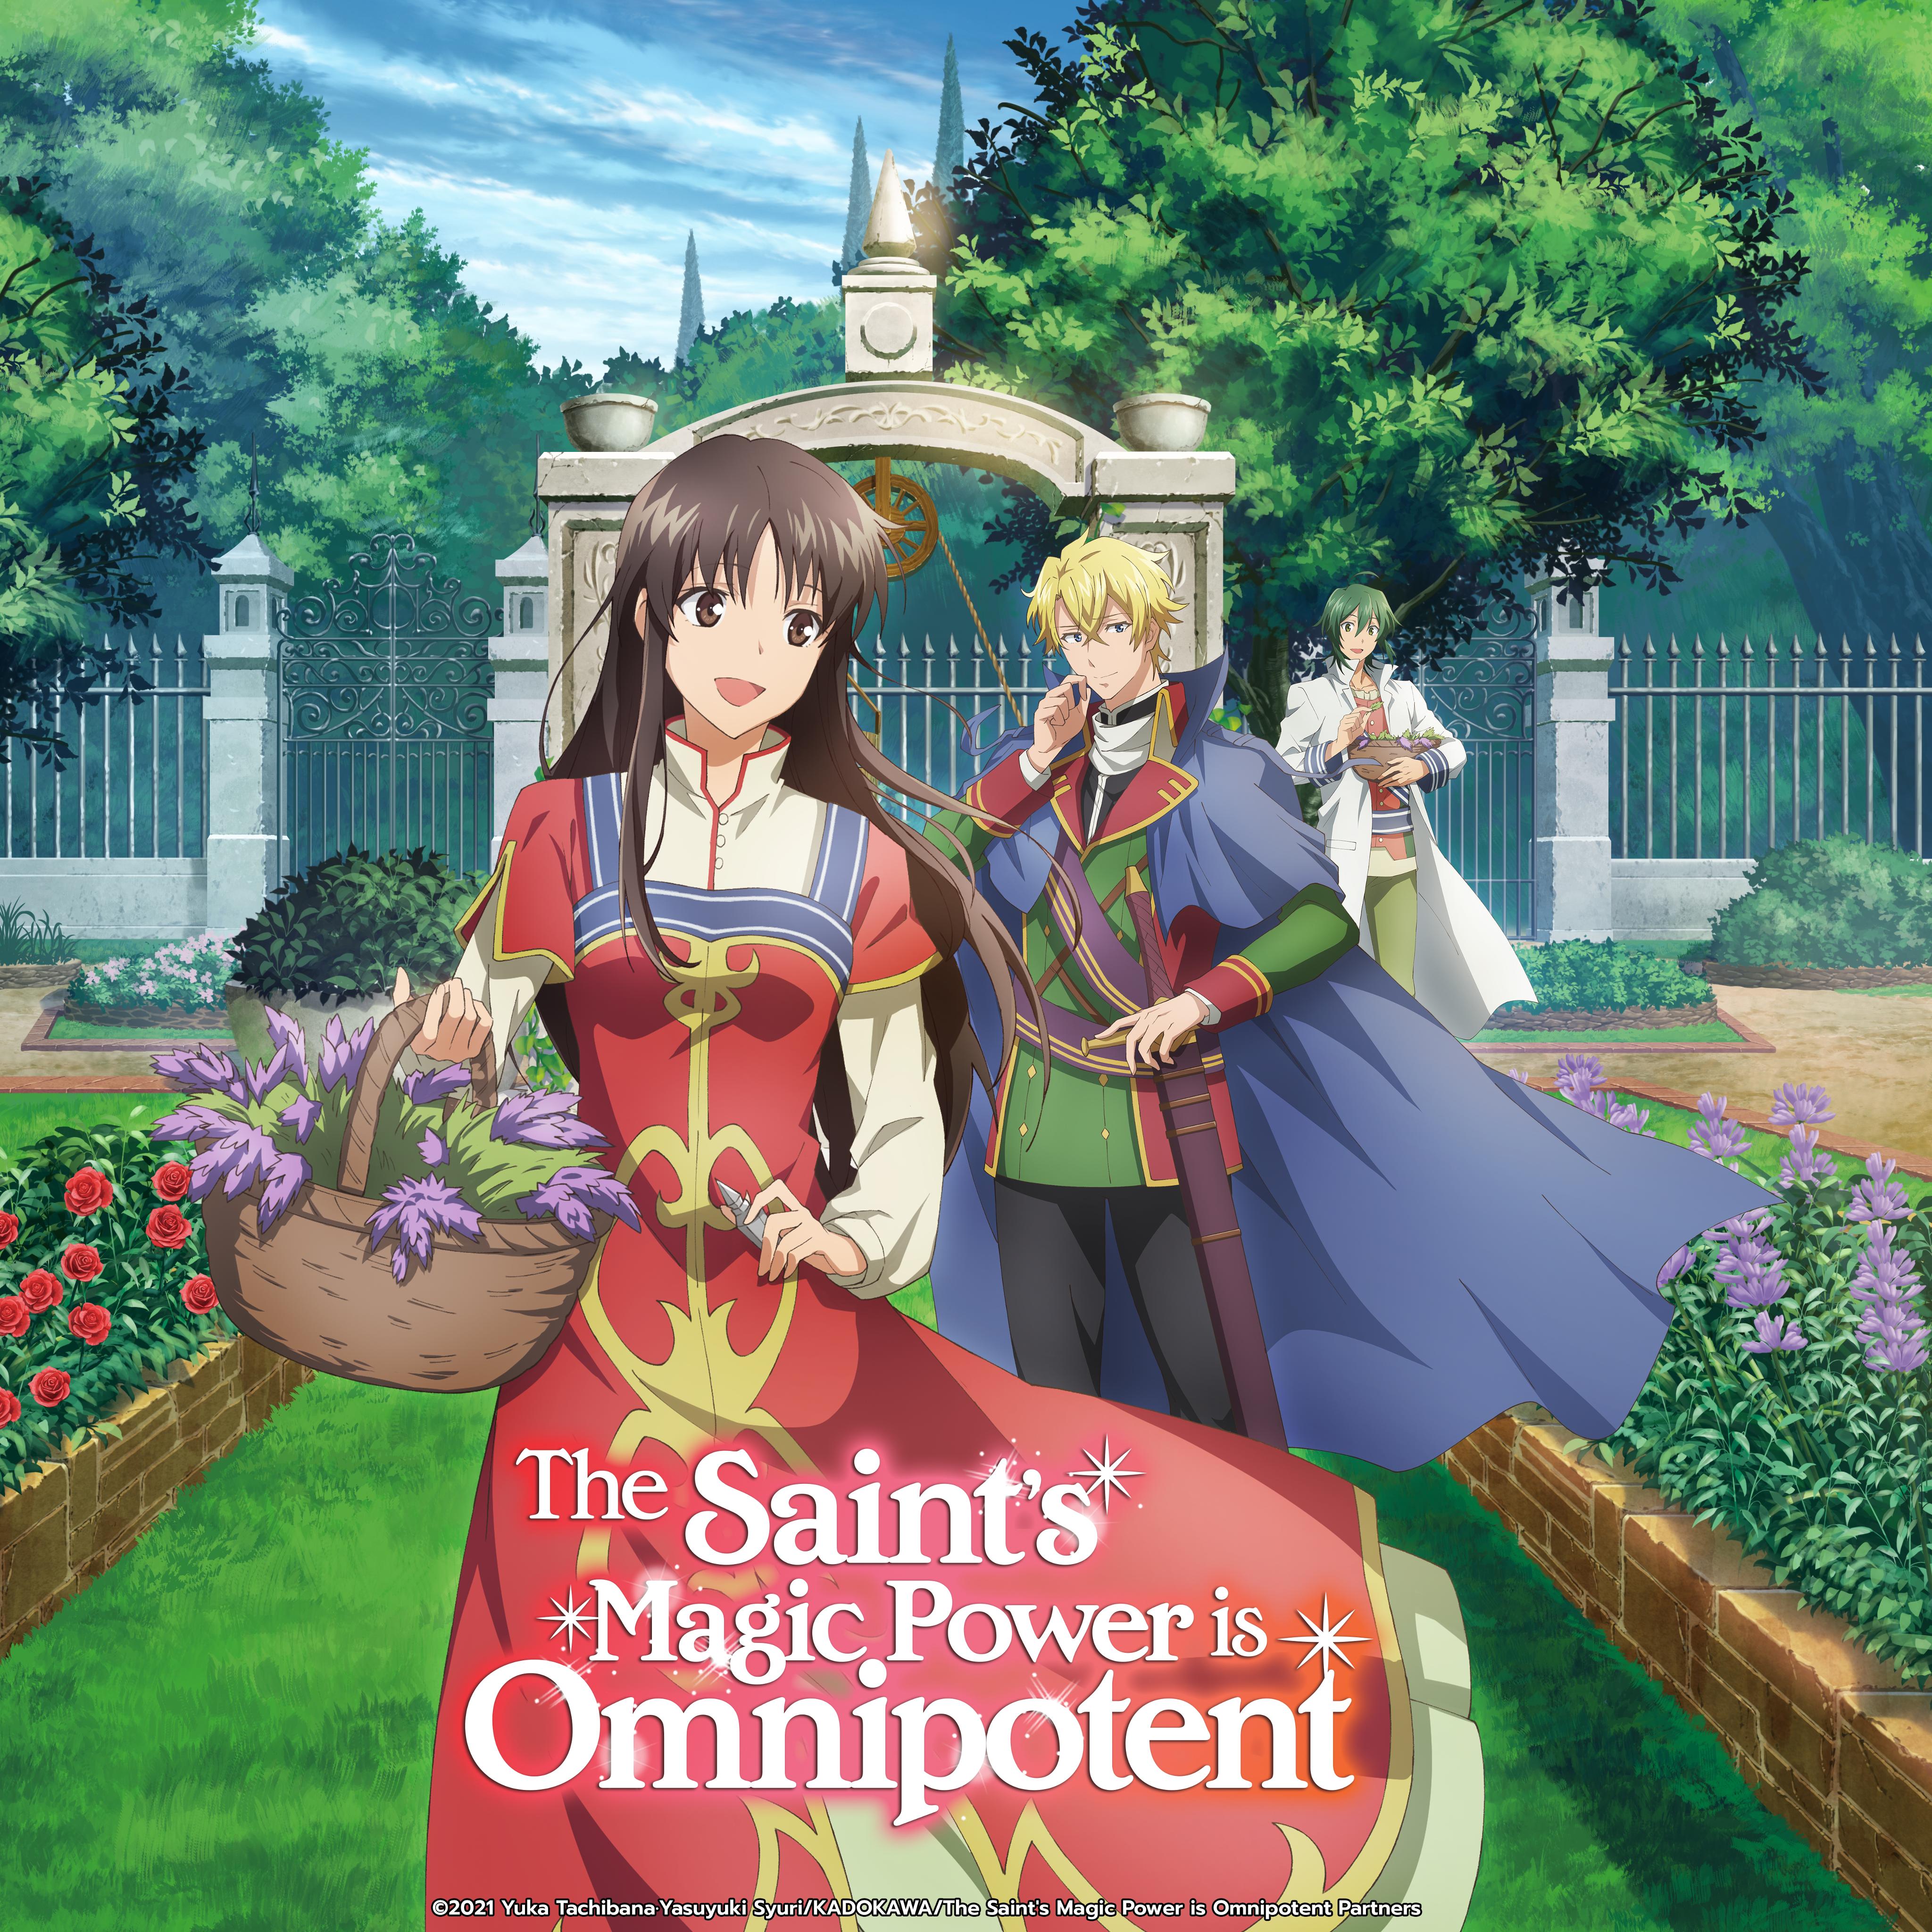 Funimation Announces The Saint's Magic Power is Omnipotent TV